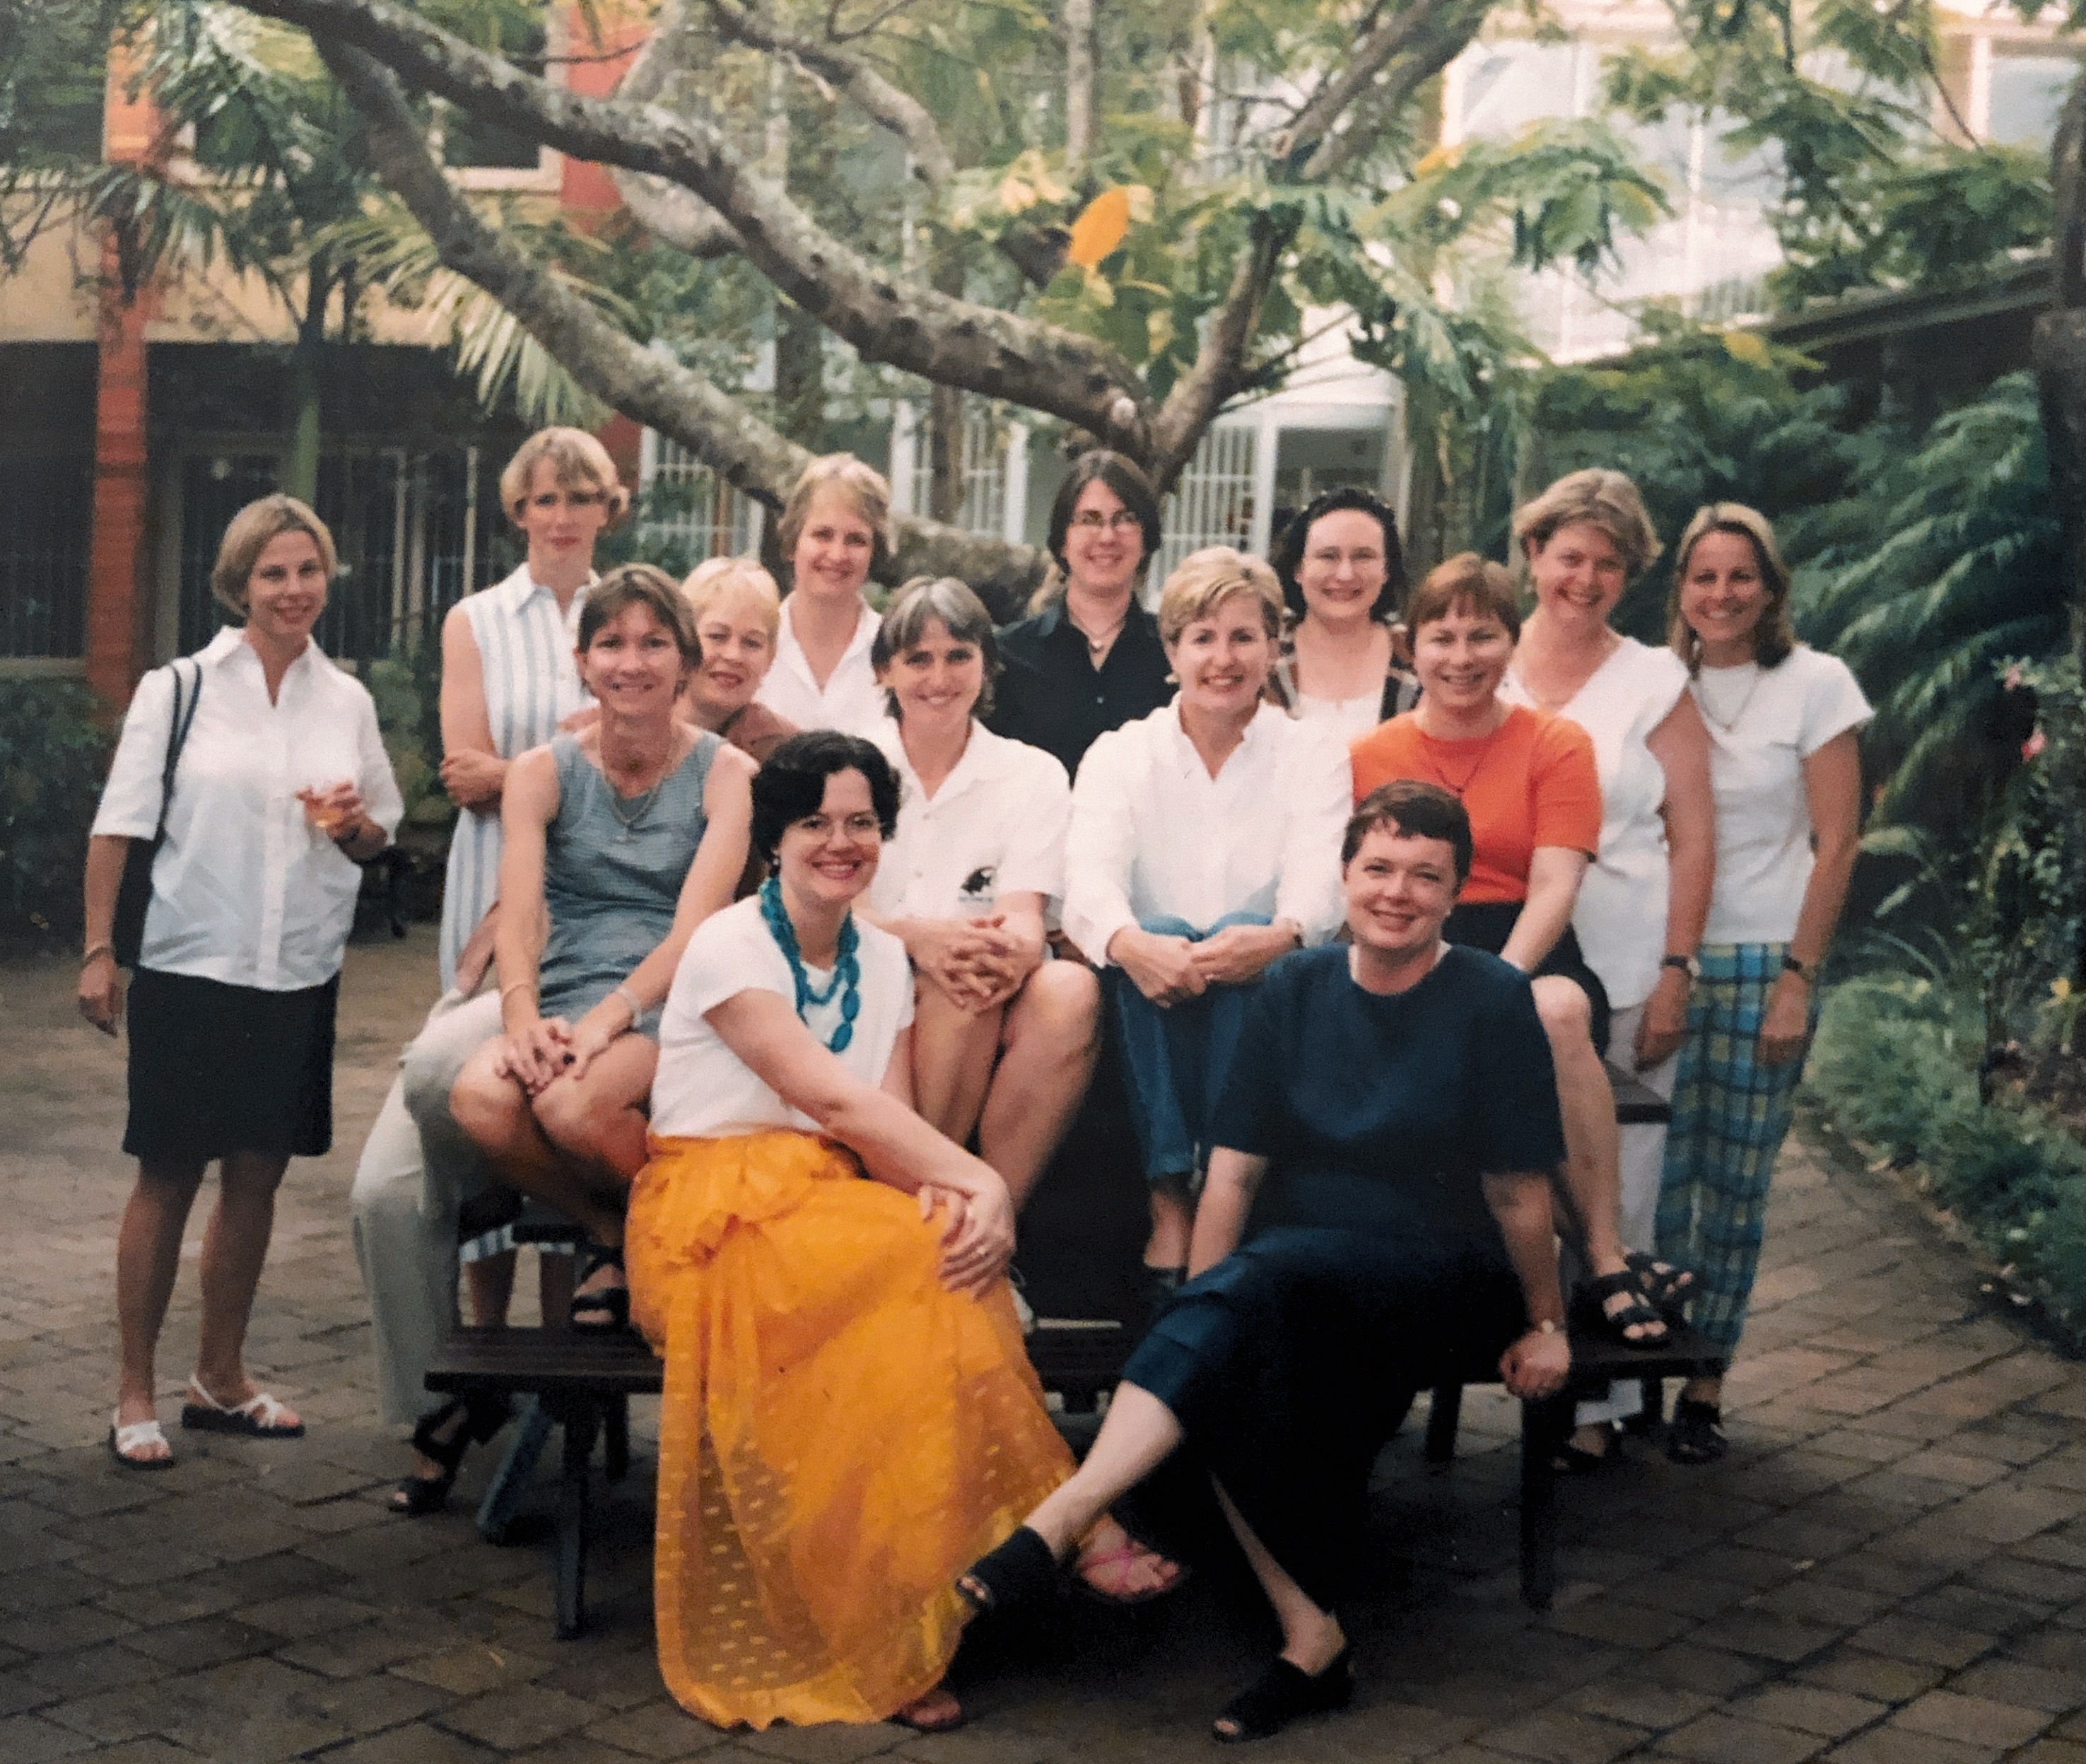 Women’s College - reunion afternoon tea for Freshers 1980.  This in February 2000. We are doing it again on July 17th 2021. Celebrating 40 years - with a Covid delay!  Spread the word!  Tickets for lunch on sale now!